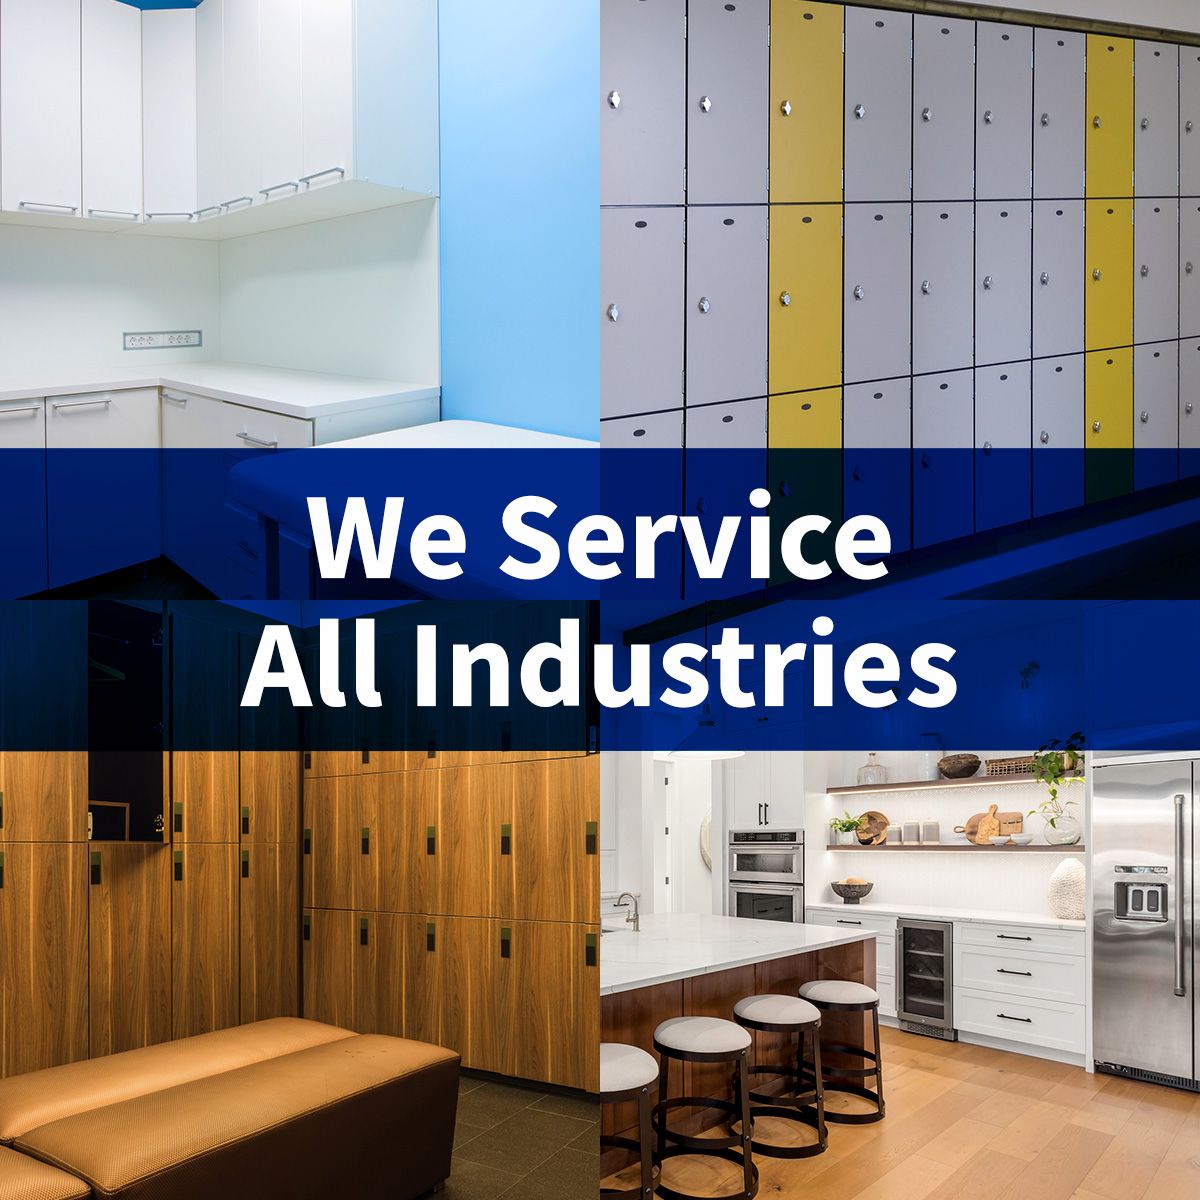 We Service All Industries